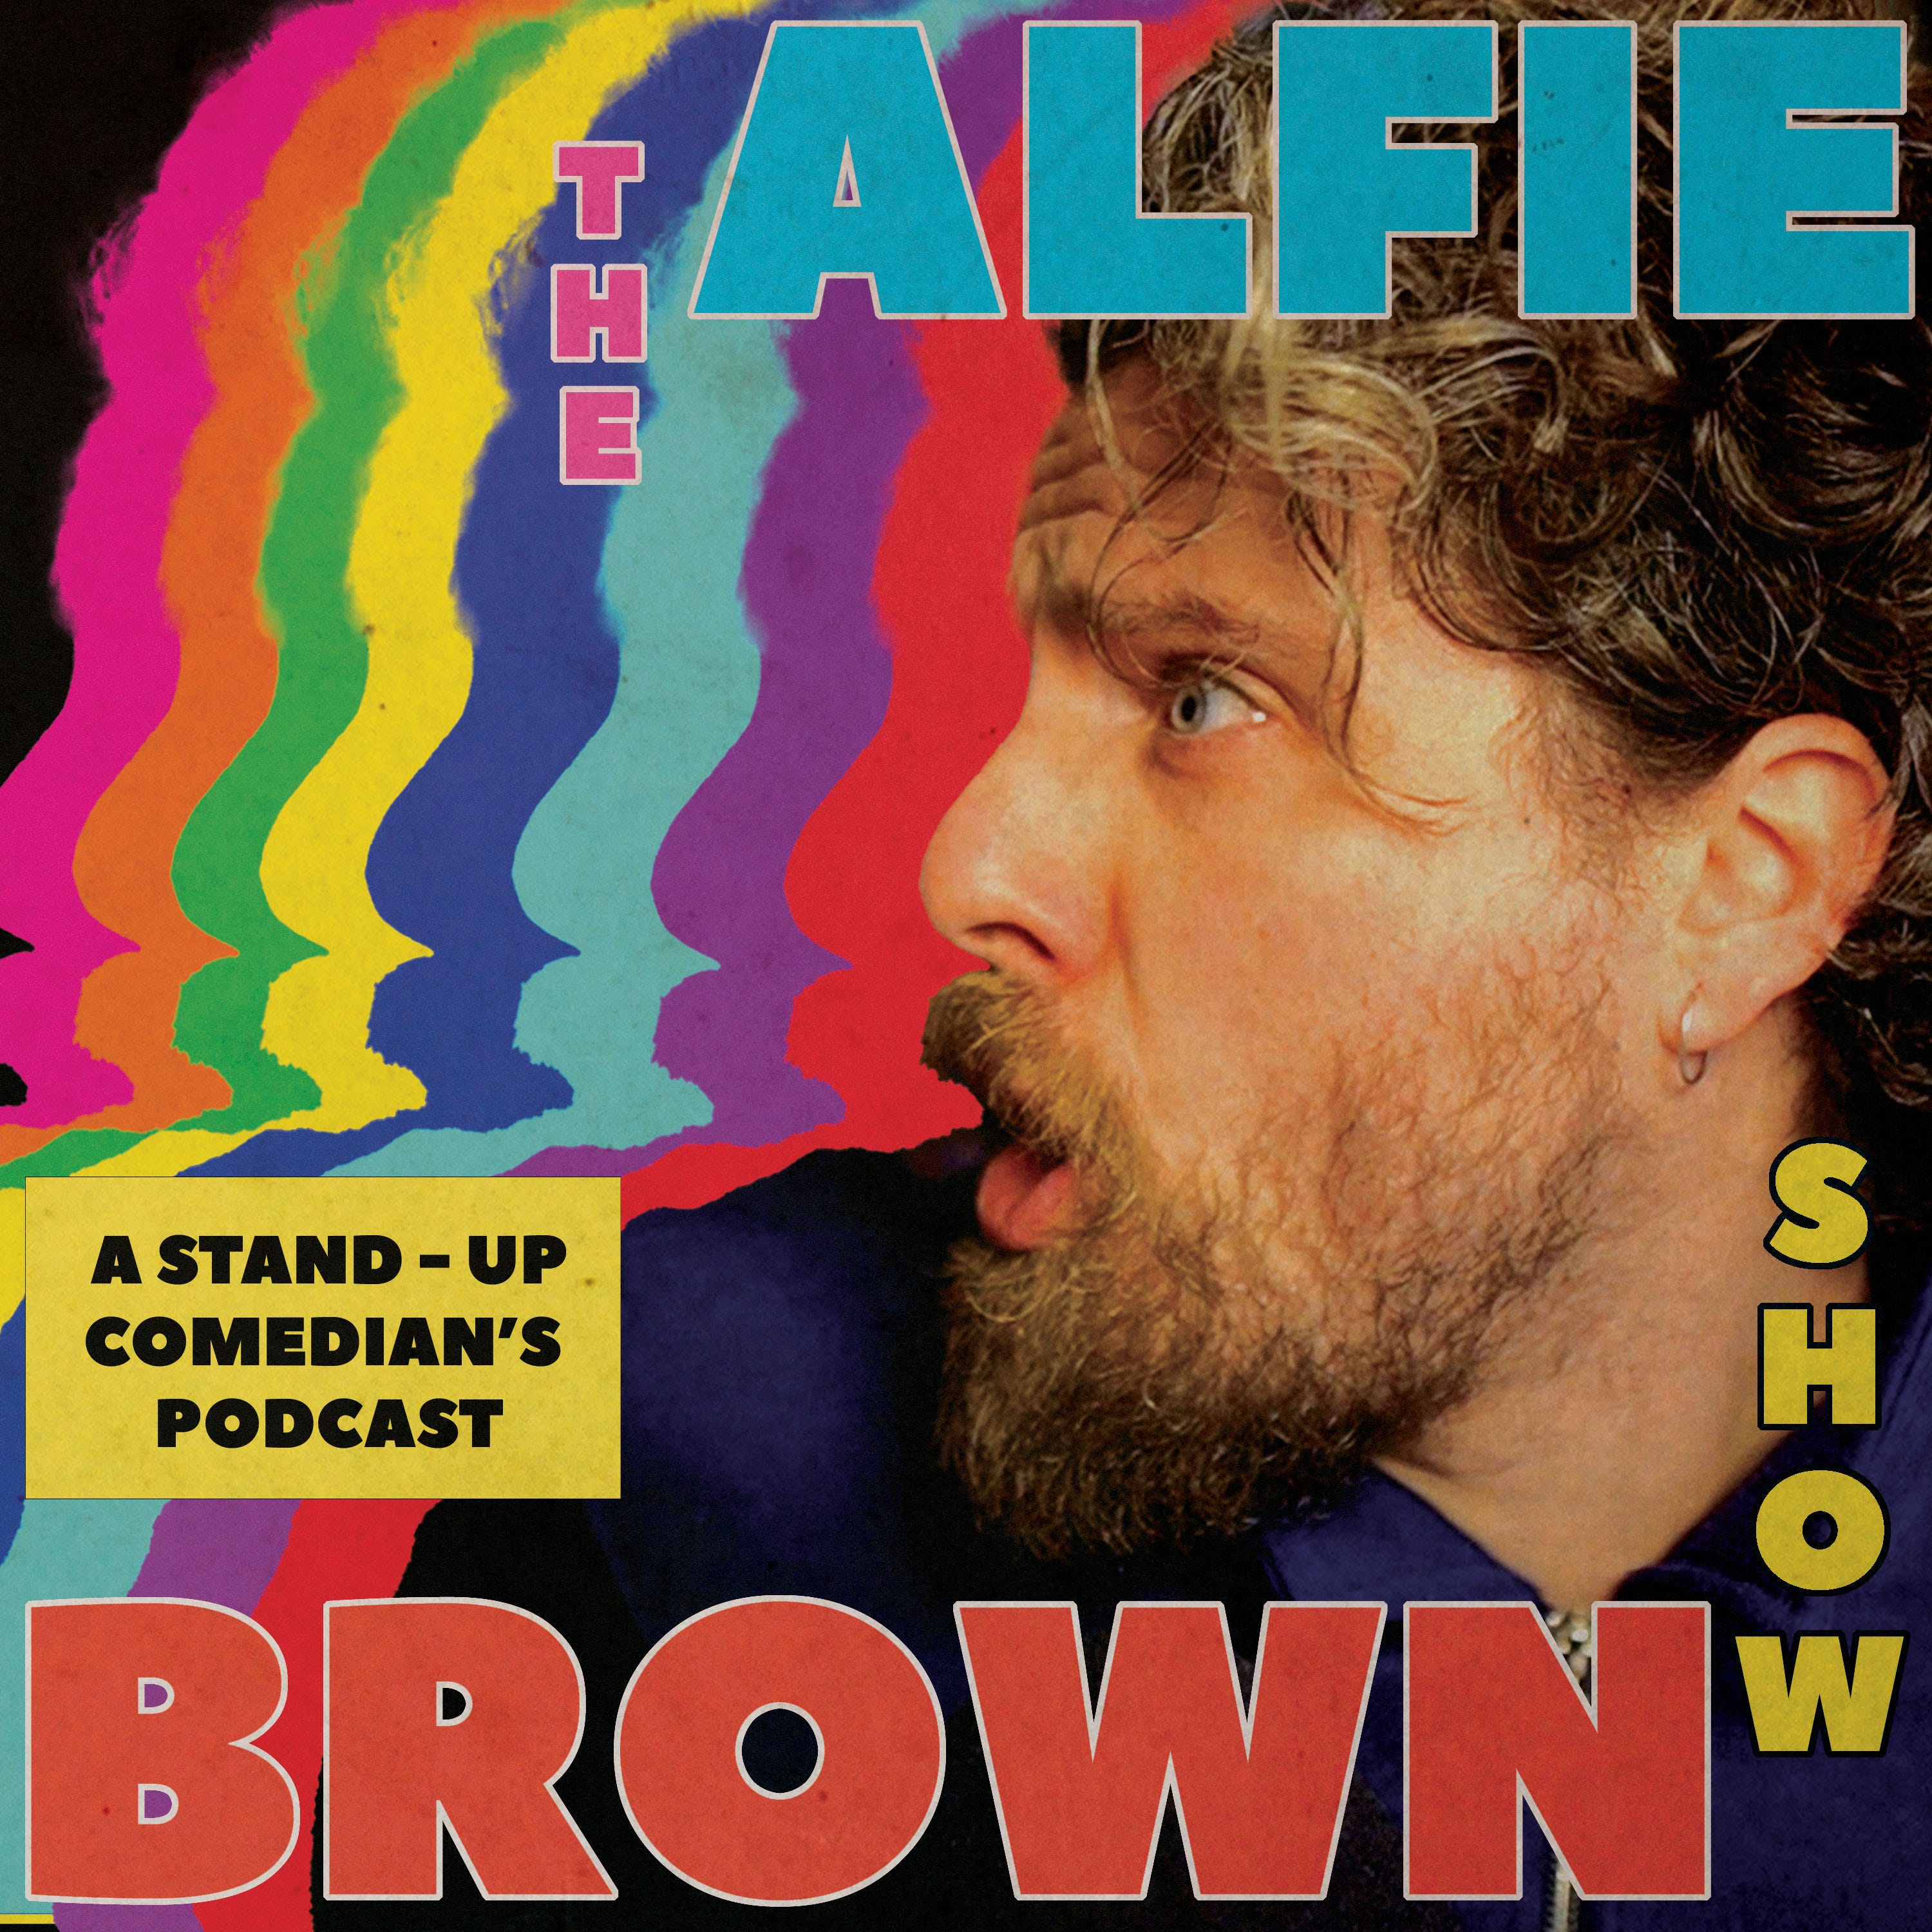 HOW YOUR RELATIONSHIP WITH YOUR PARENTS CHANGES - EPISODE 15 - THE ALFIE BROWN SHOW